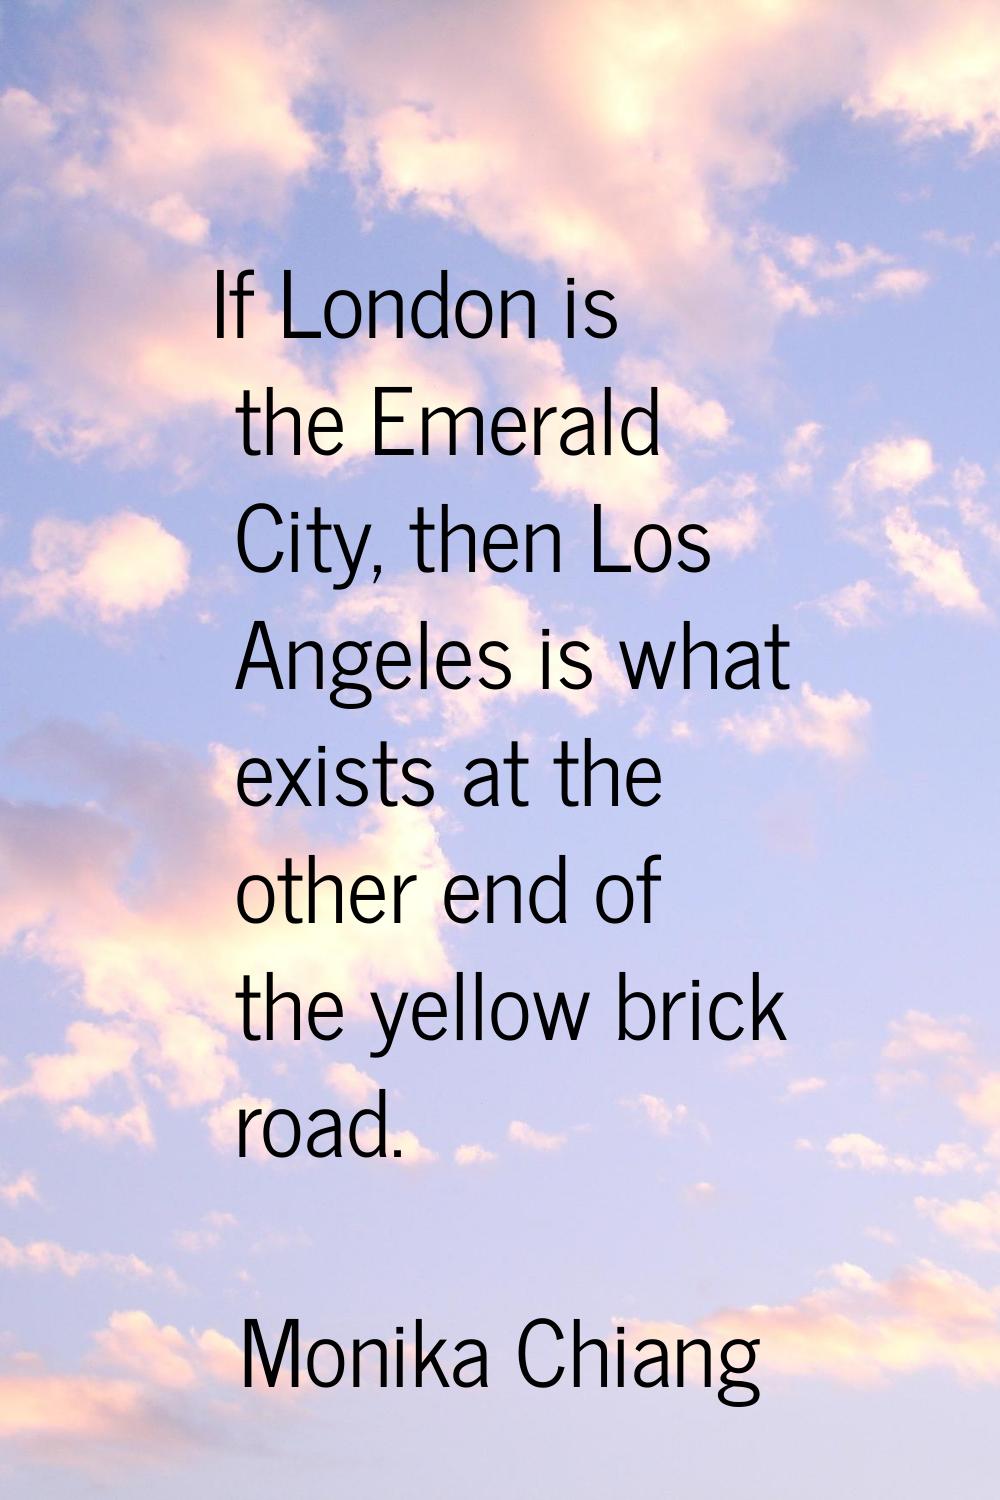 If London is the Emerald City, then Los Angeles is what exists at the other end of the yellow brick